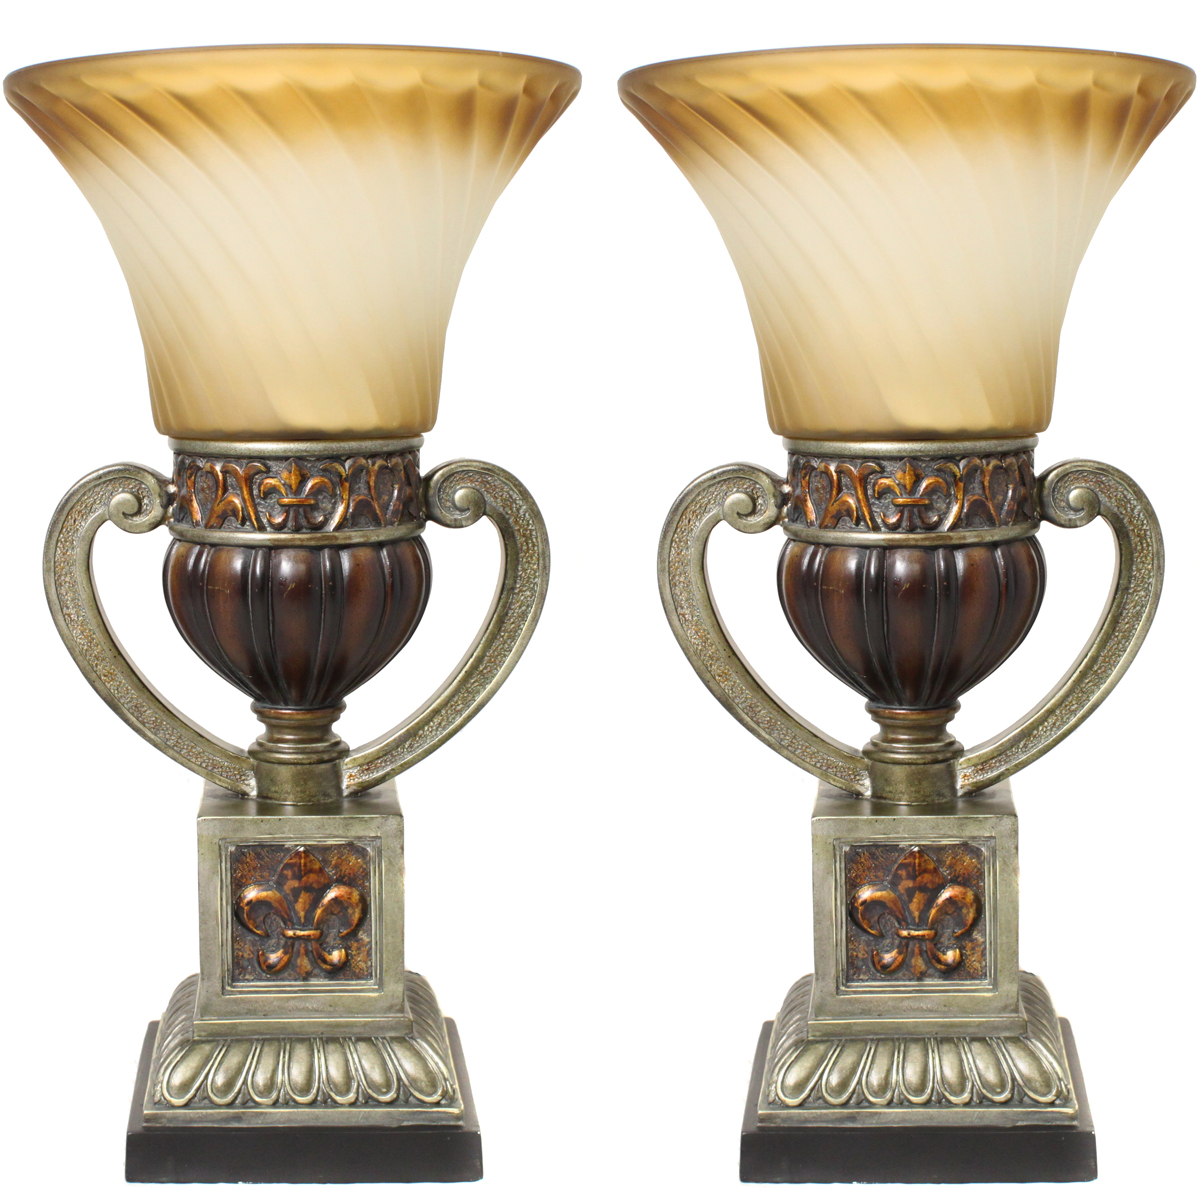 Urban Designs 7734759 22 In. Parisian Torchiere Uplight Table Lamp - Set Of 2